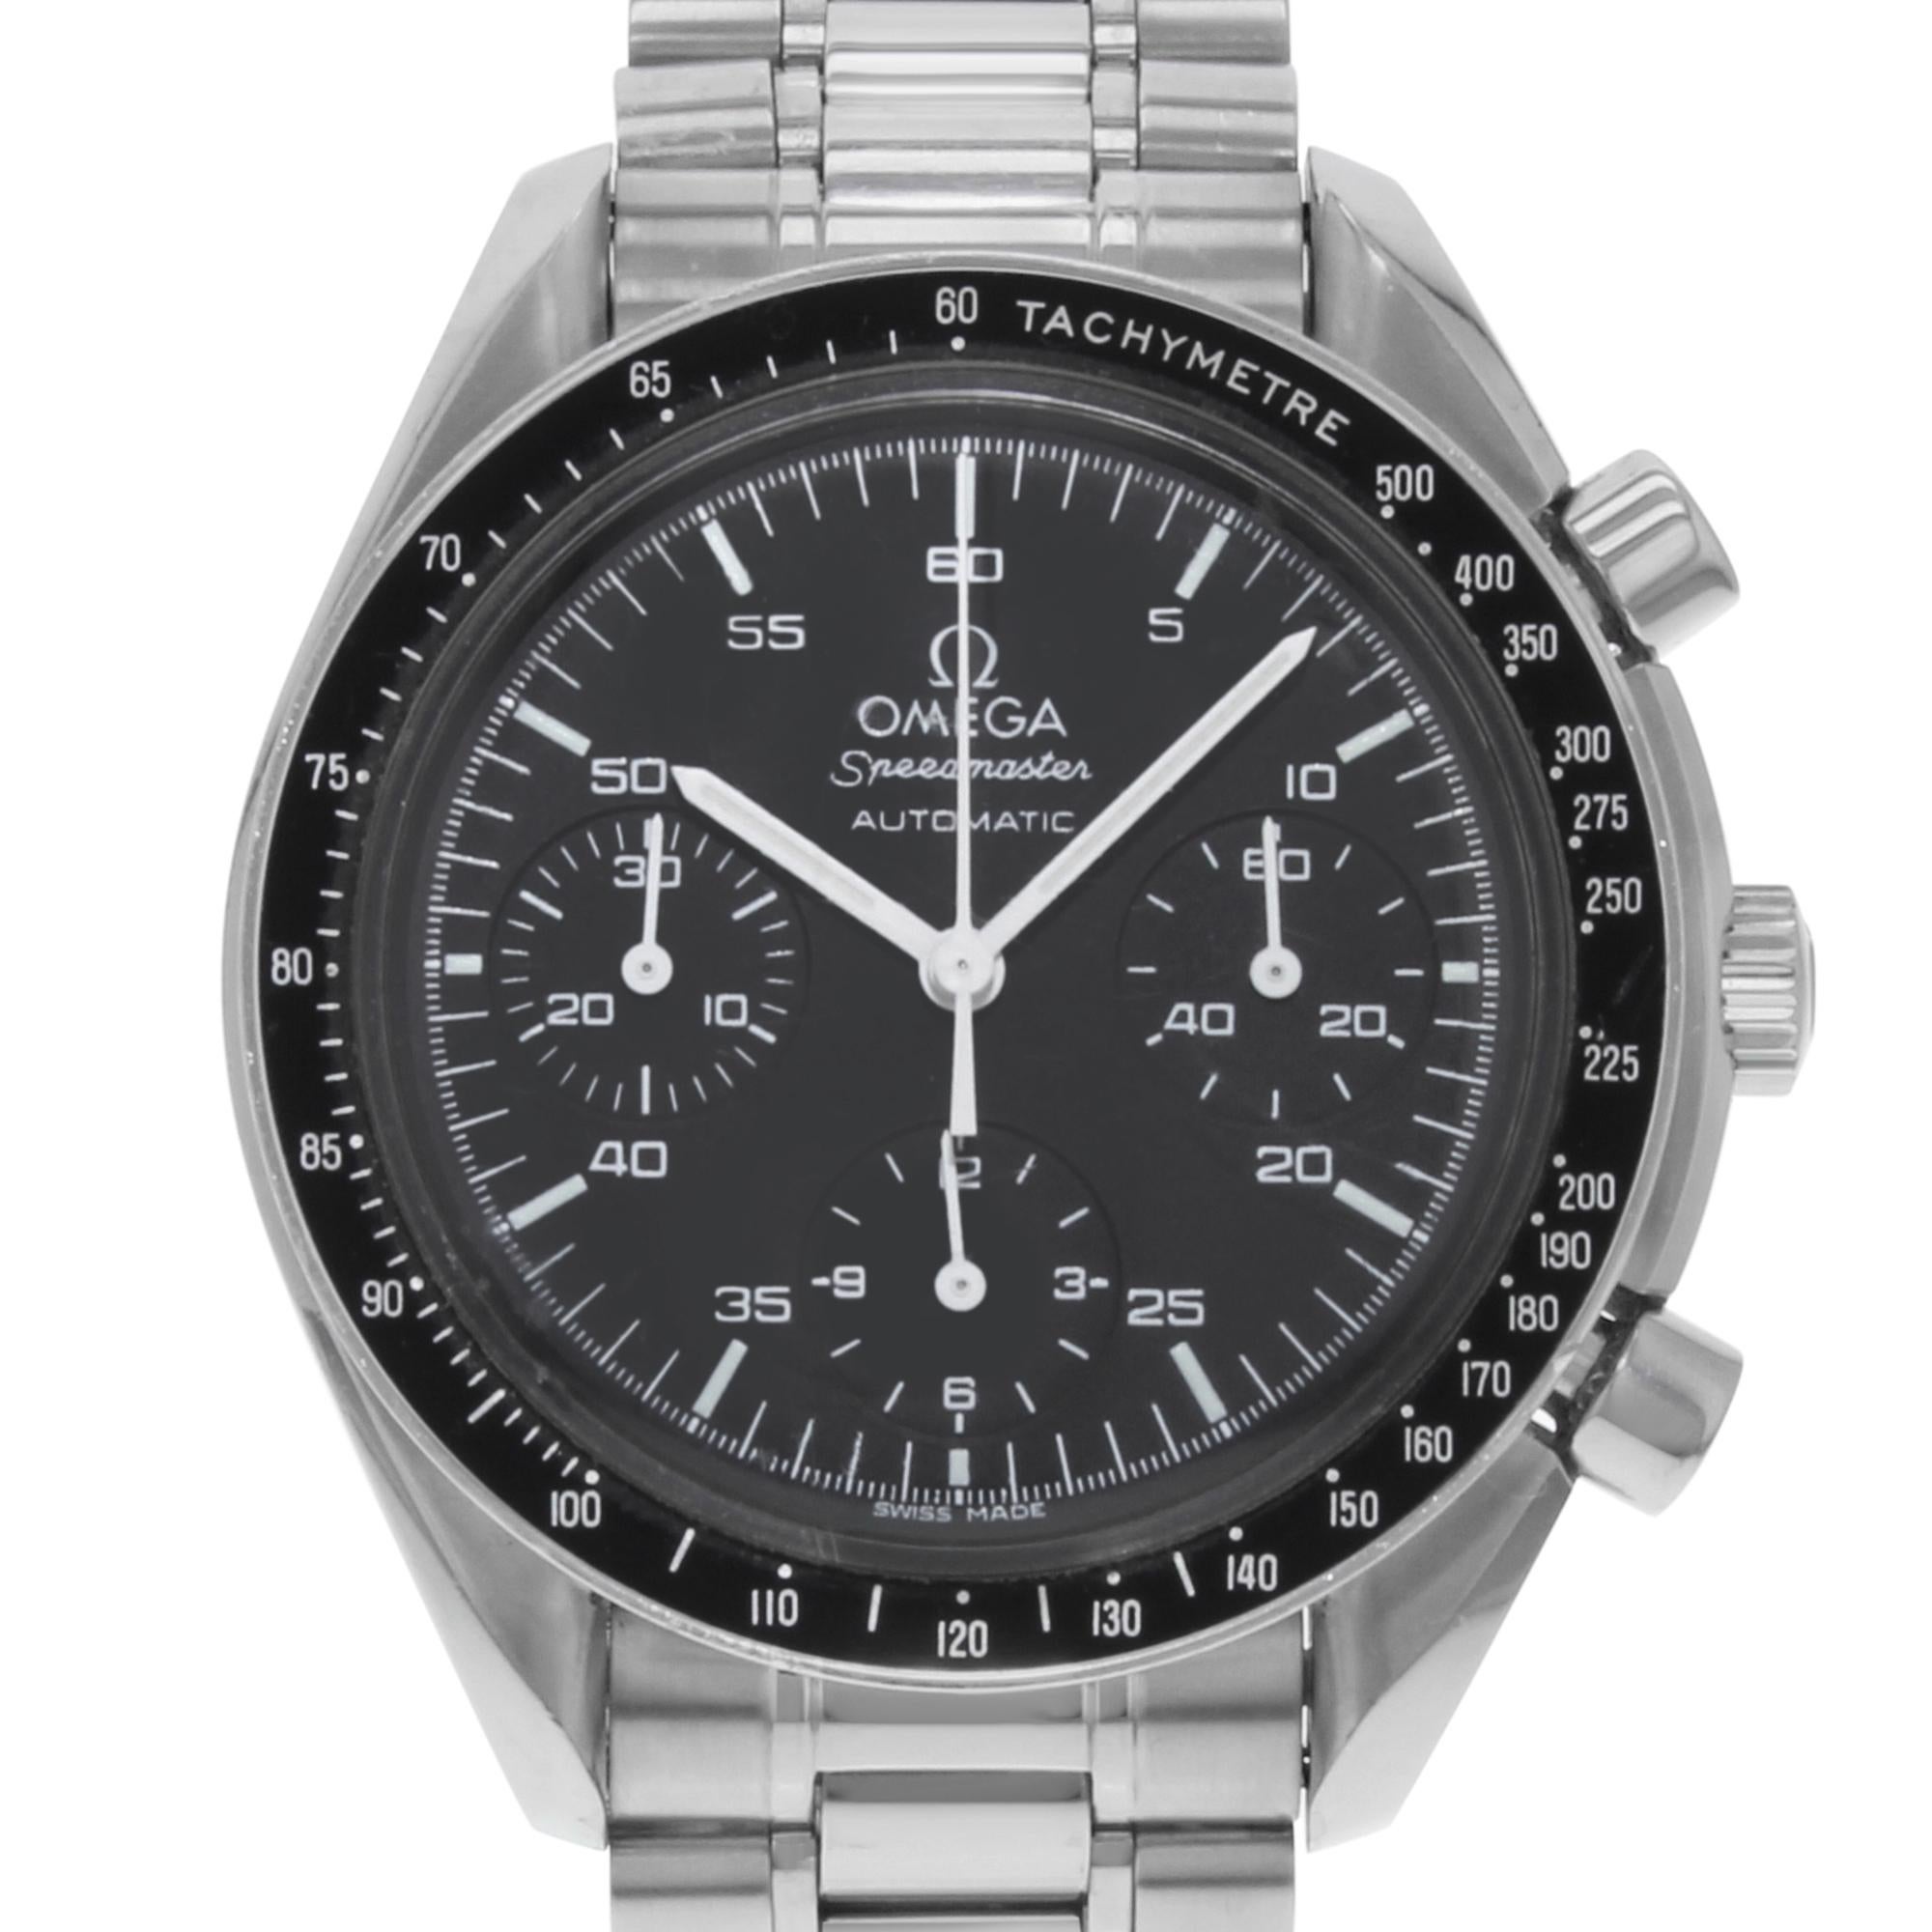 Pre Owned Omega Speedmaster 39mm Reduced Steel Black Dial Automatic Men's Watch 3510.50.00. This Beautiful Timepiece Features: Stainless Steel Case & Bracelet Fixed Stainless Steel Bezel with Black Tachymeter Scale Top Ring, Black Dial with Luminous